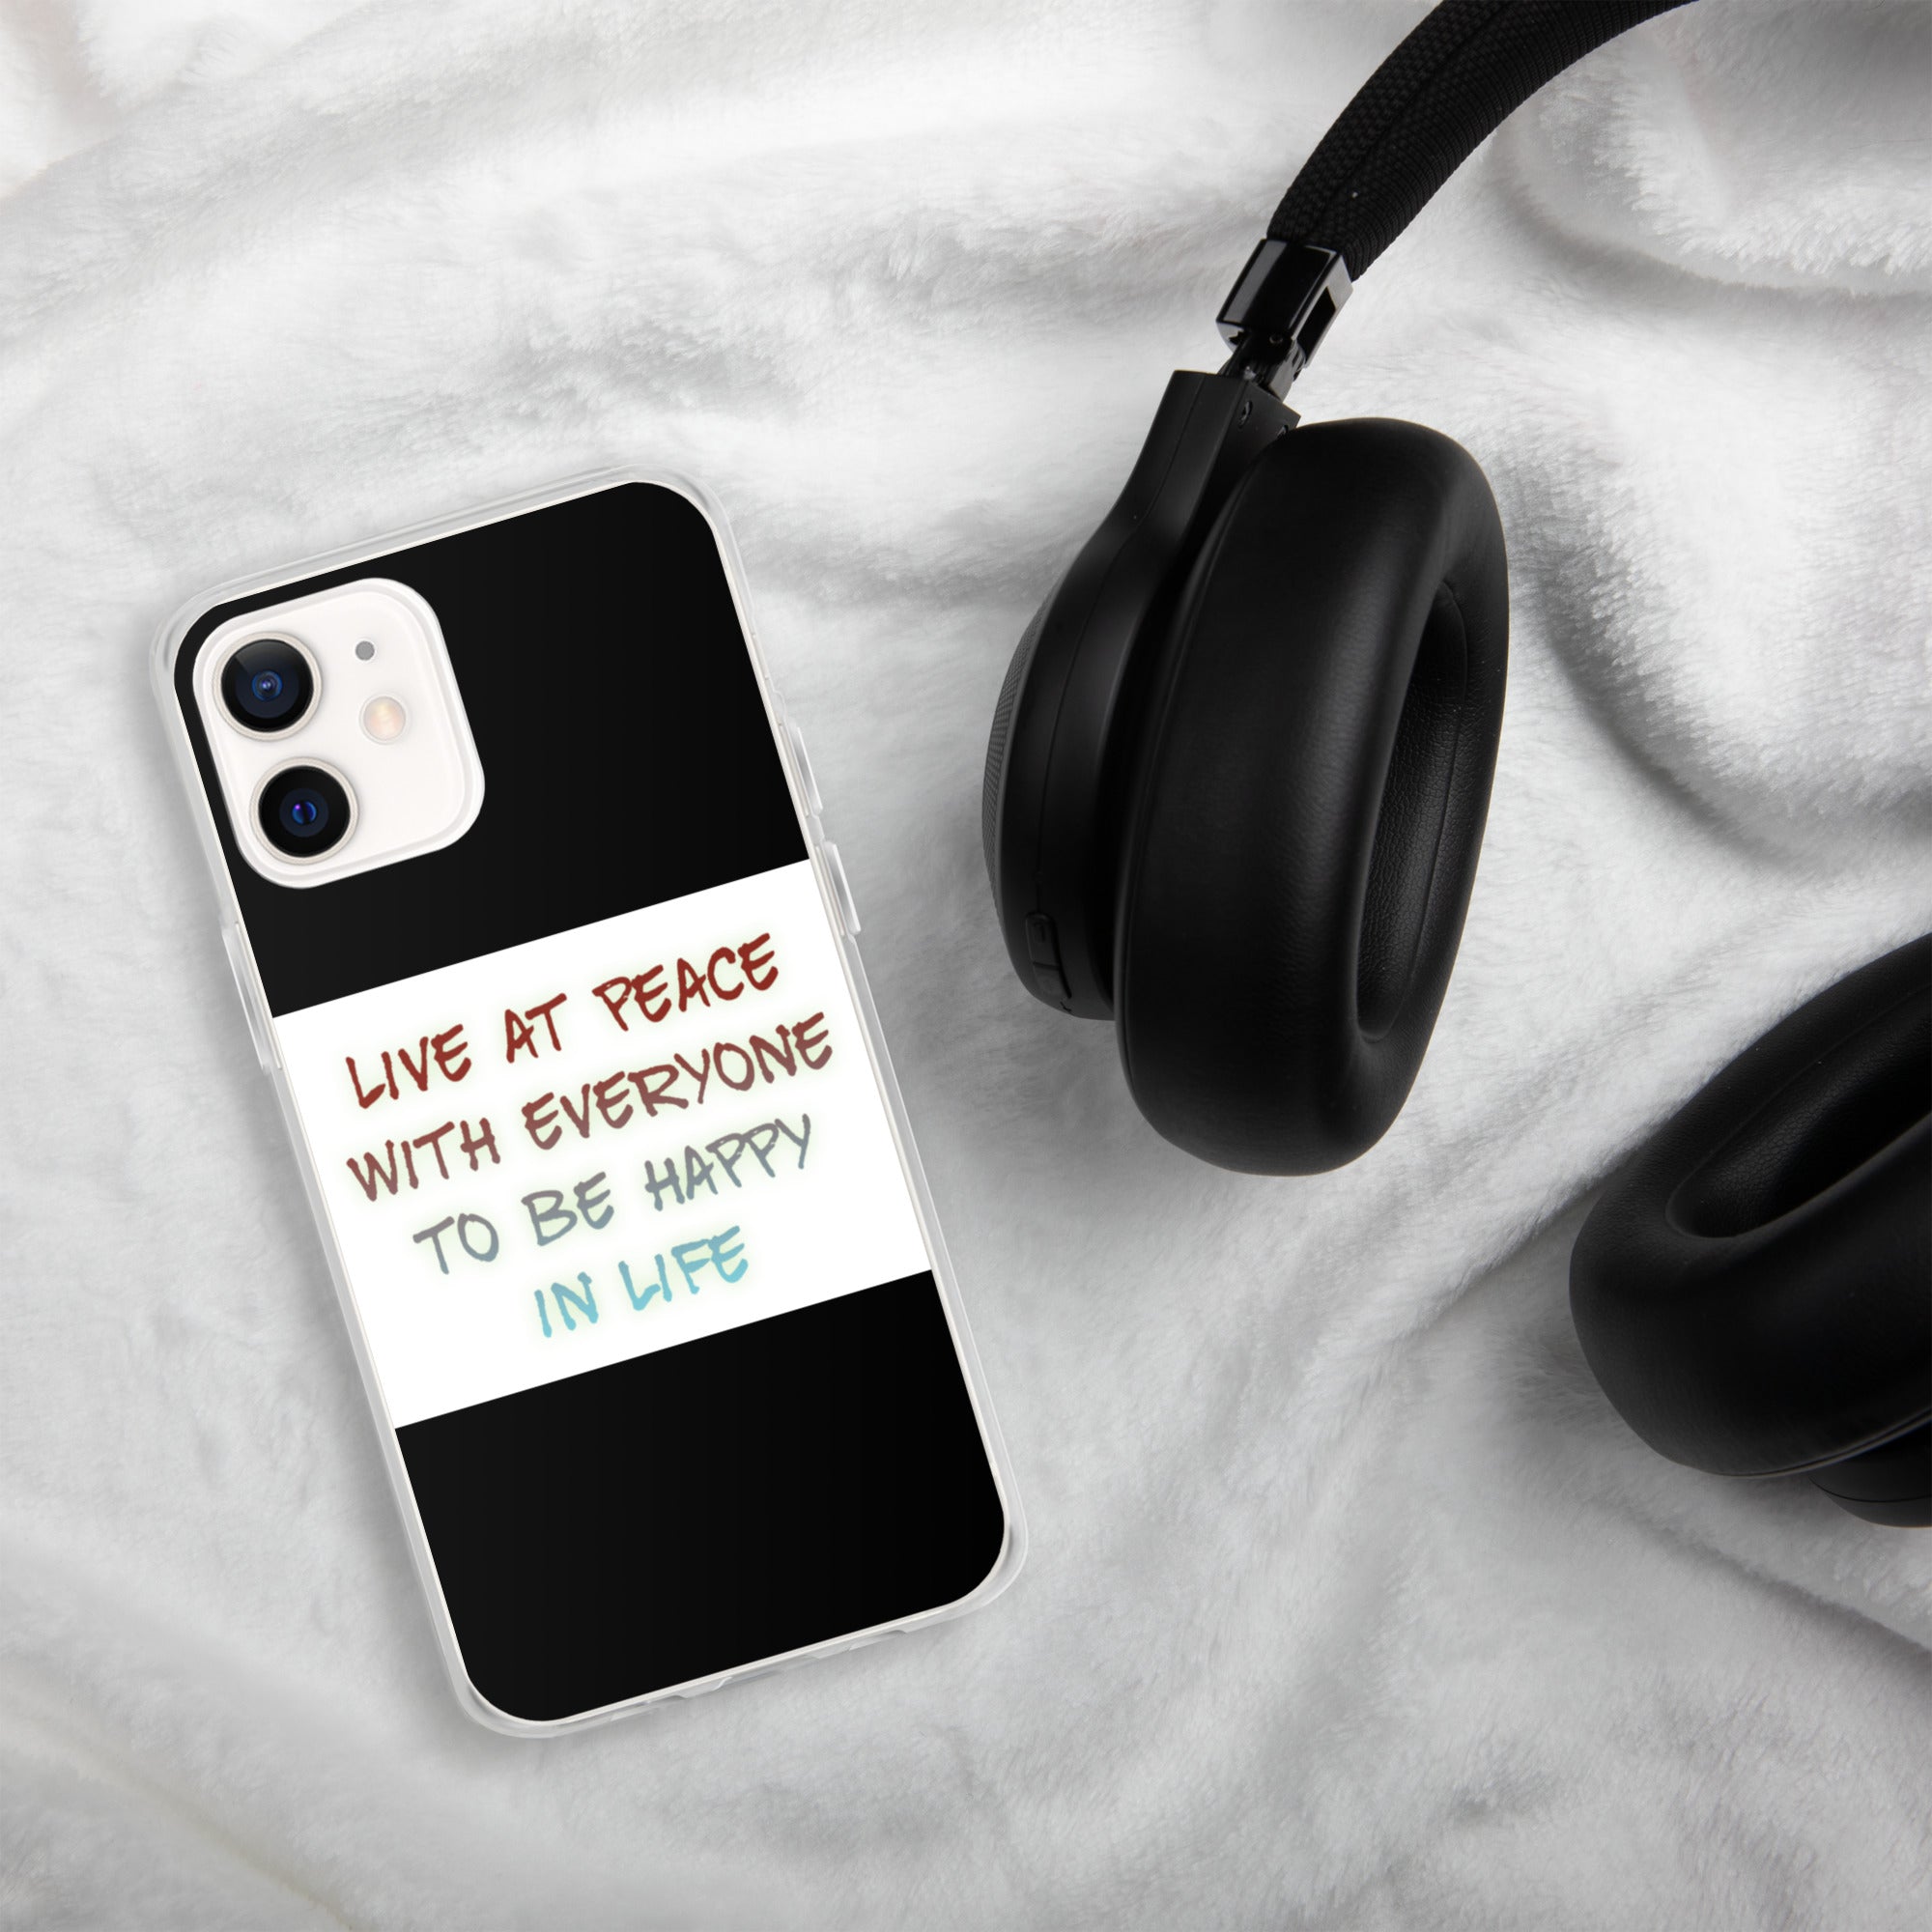 GloWell Designs - iPhone Case - Motivational Quote - Live At Peace With Everyone - GloWell Designs